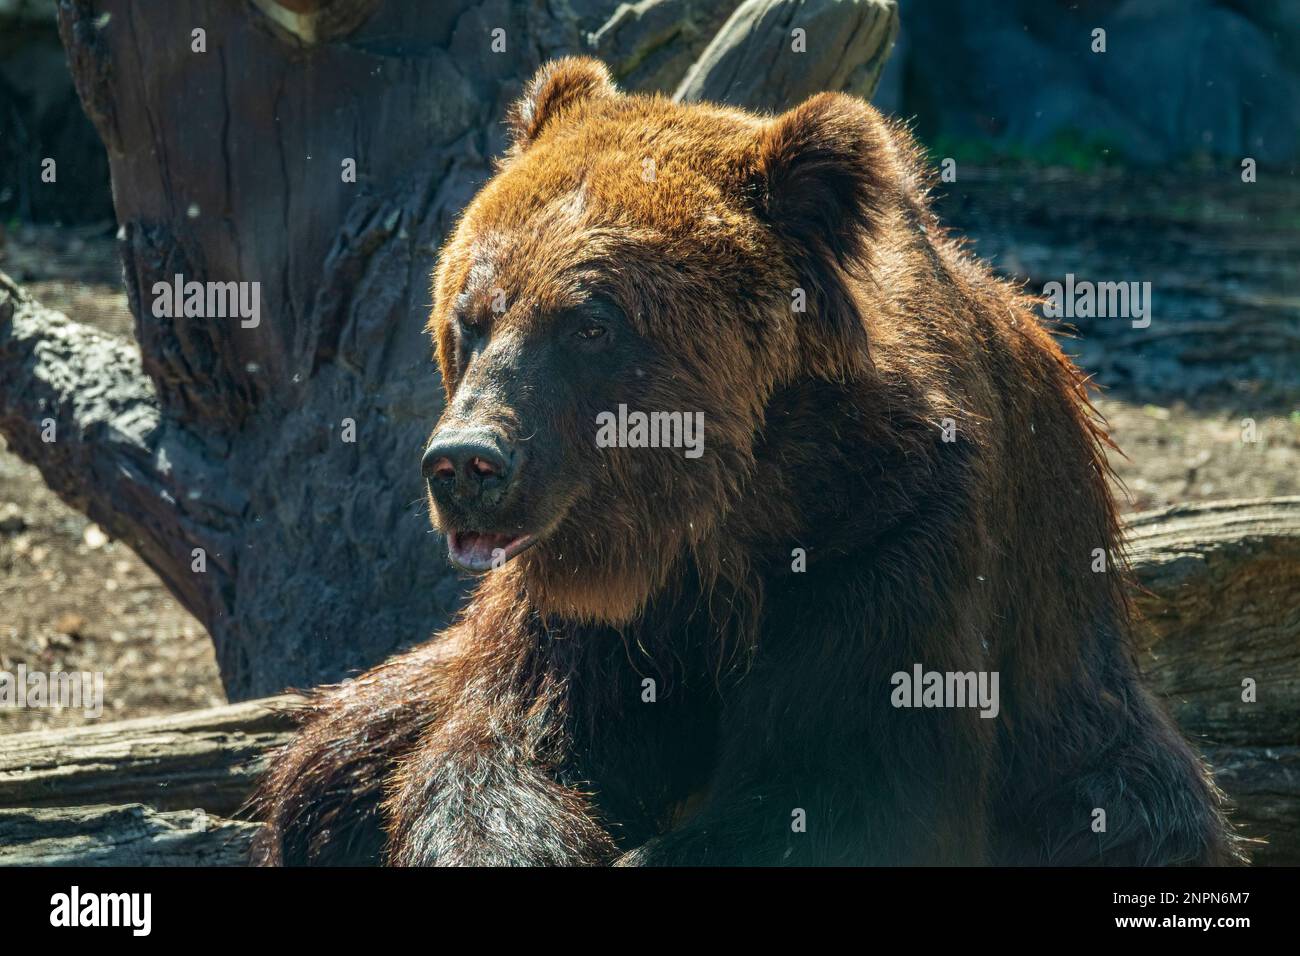 Funny brown bear portrait. Life in the zoo Stock Photo